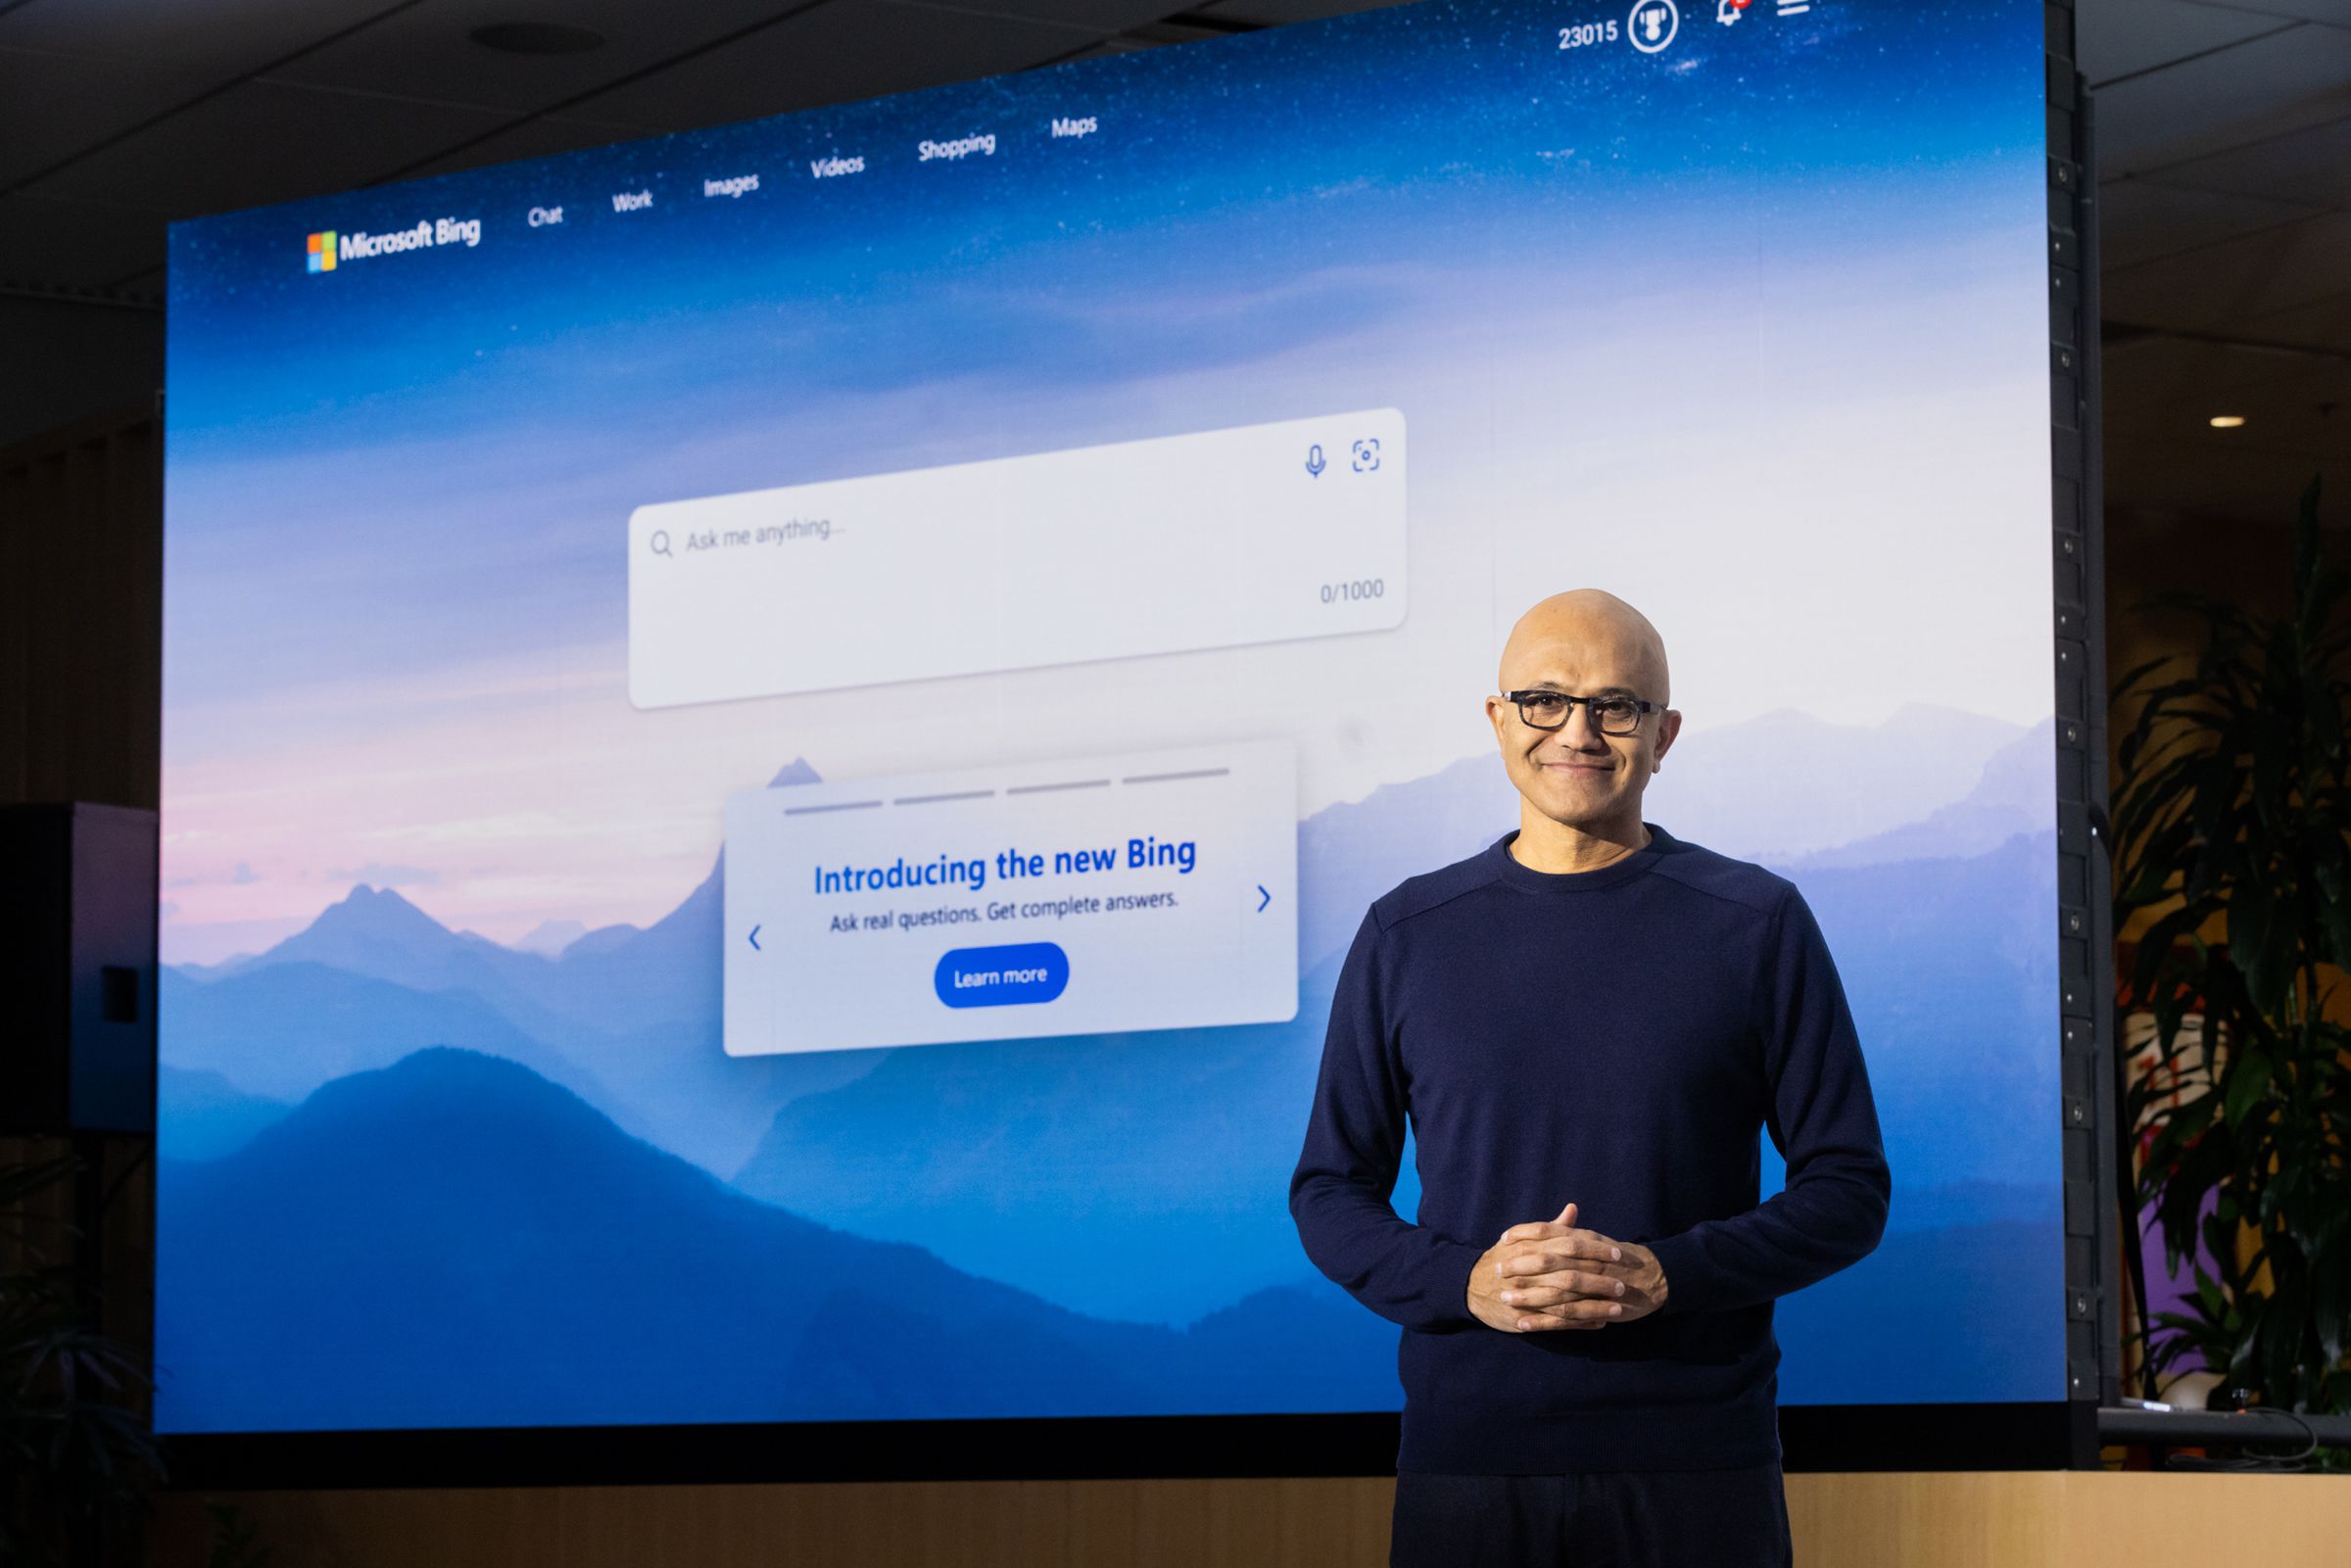 Microsoft CEO Satya Nadella appeared onstage early for the Bing event.